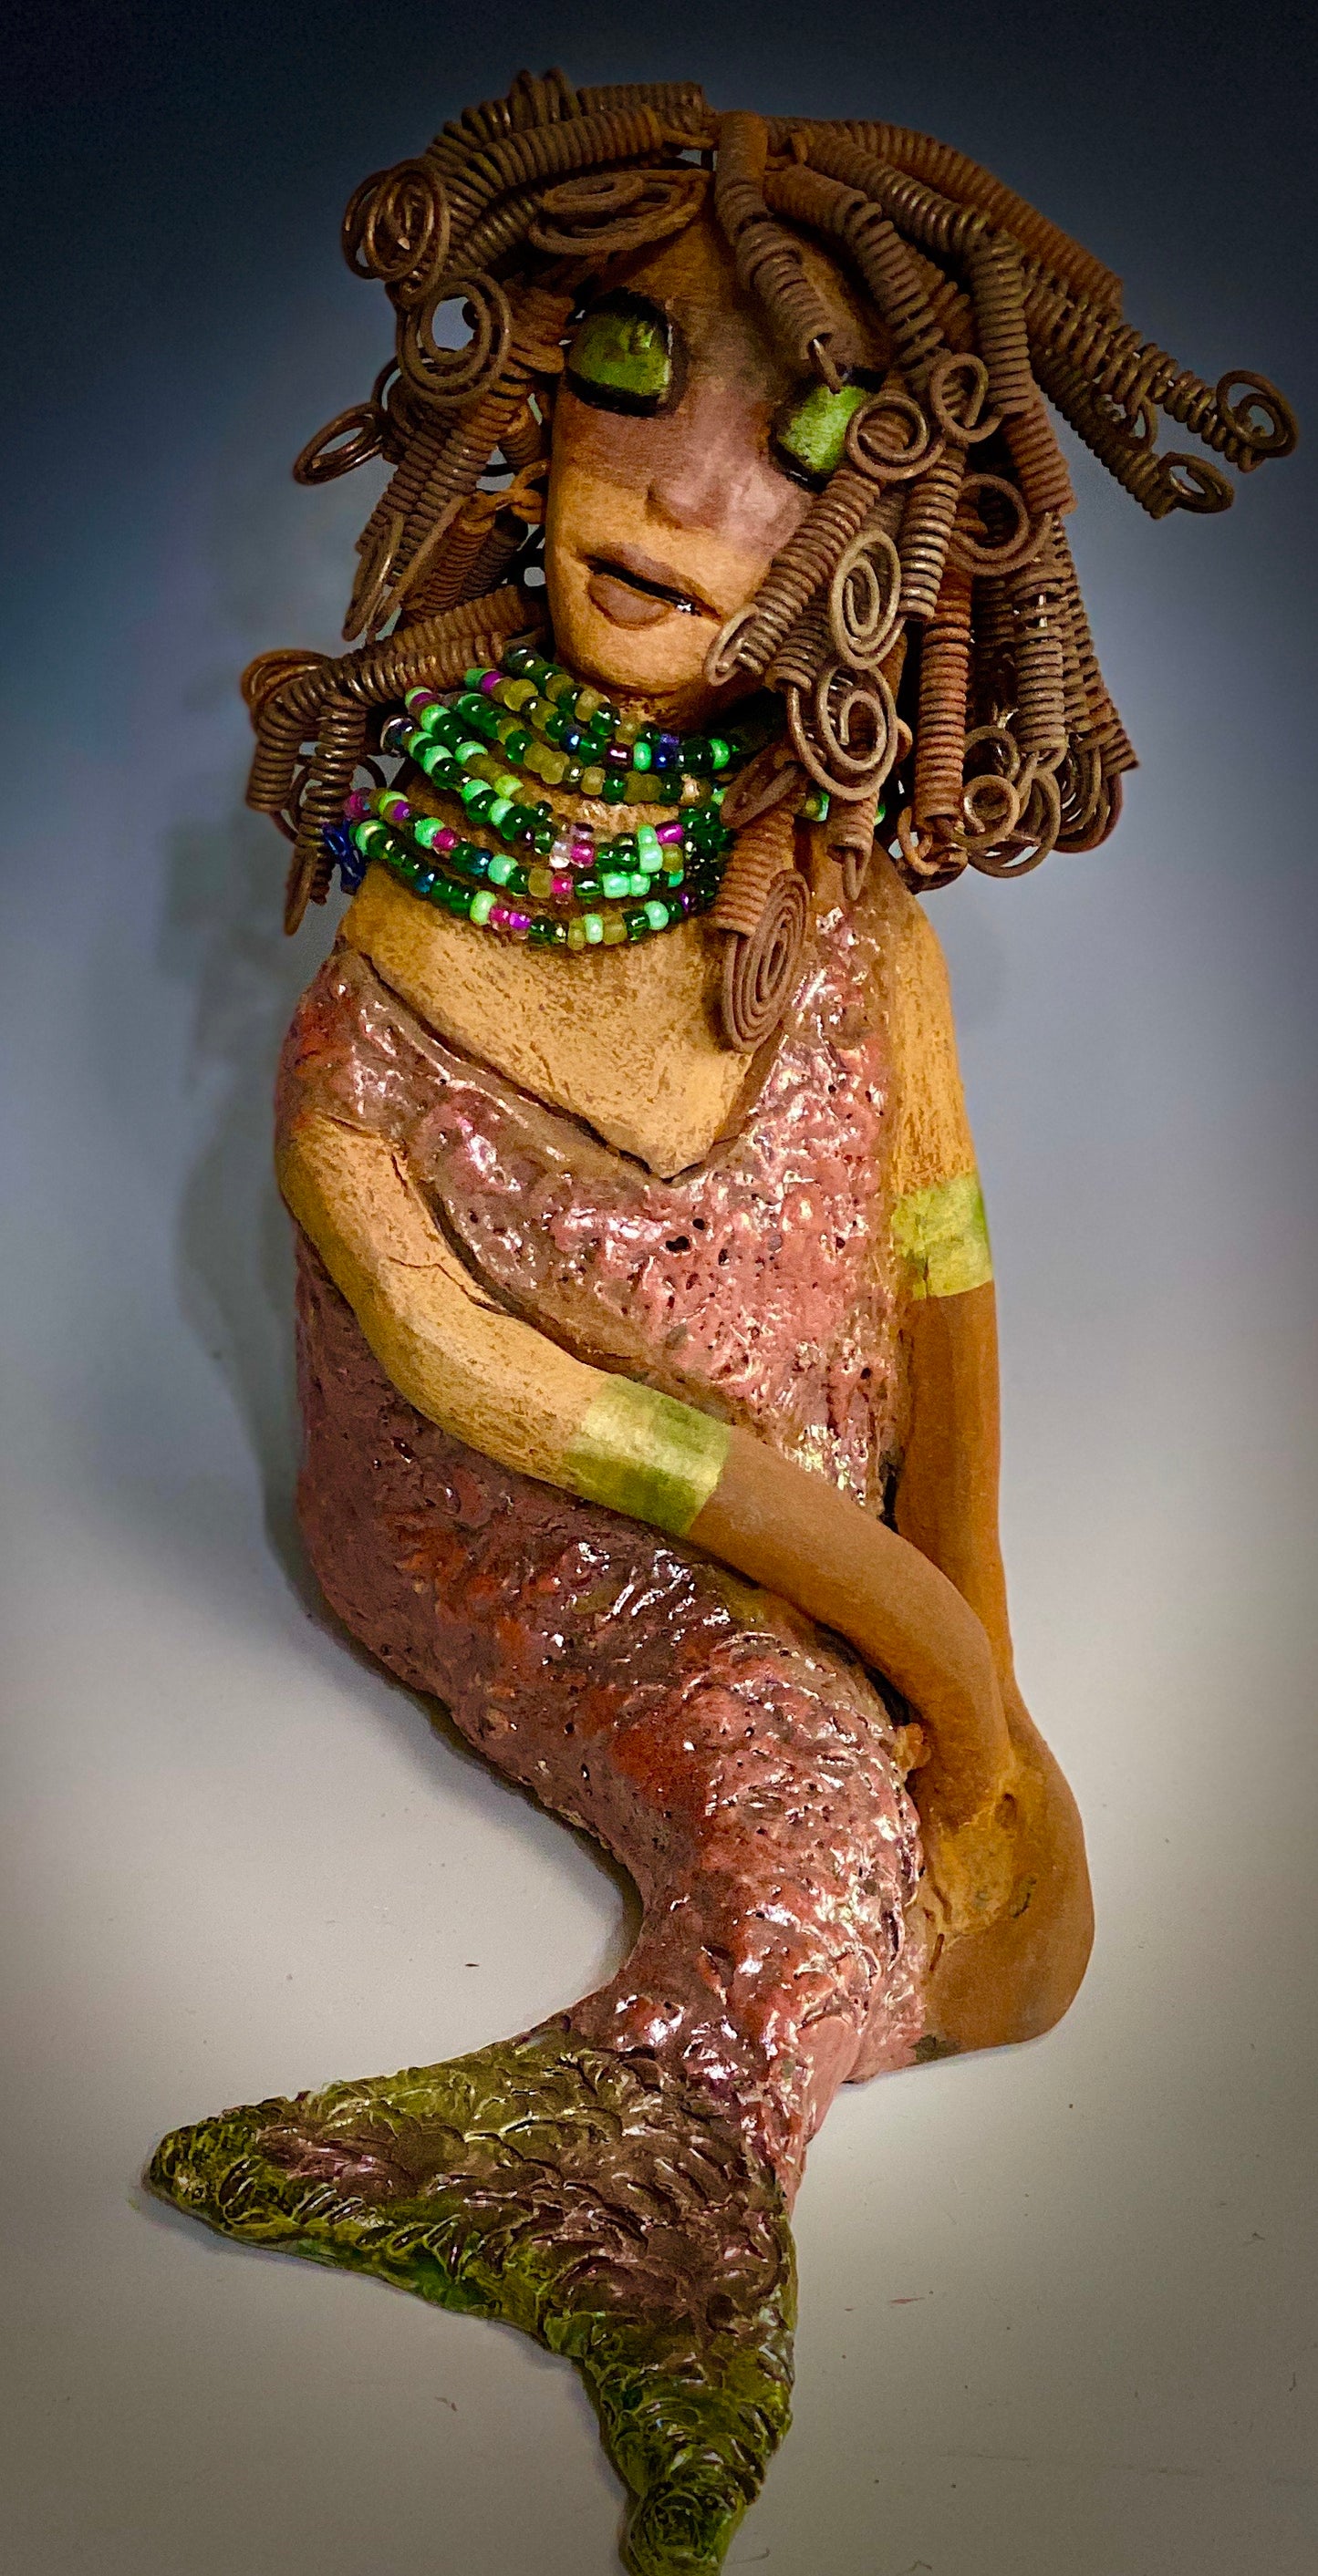 "Honestly, I can not explain where this desire to make mermaids come from. When I created my first raku fired mermaid, I was amazed at how well my homemade metallic copper green glaze worked with the mermaid's body suit. It was a good match with the honey brown complexion I use with most of my sculptures".  Compare Meranda with Melody the mermaid.